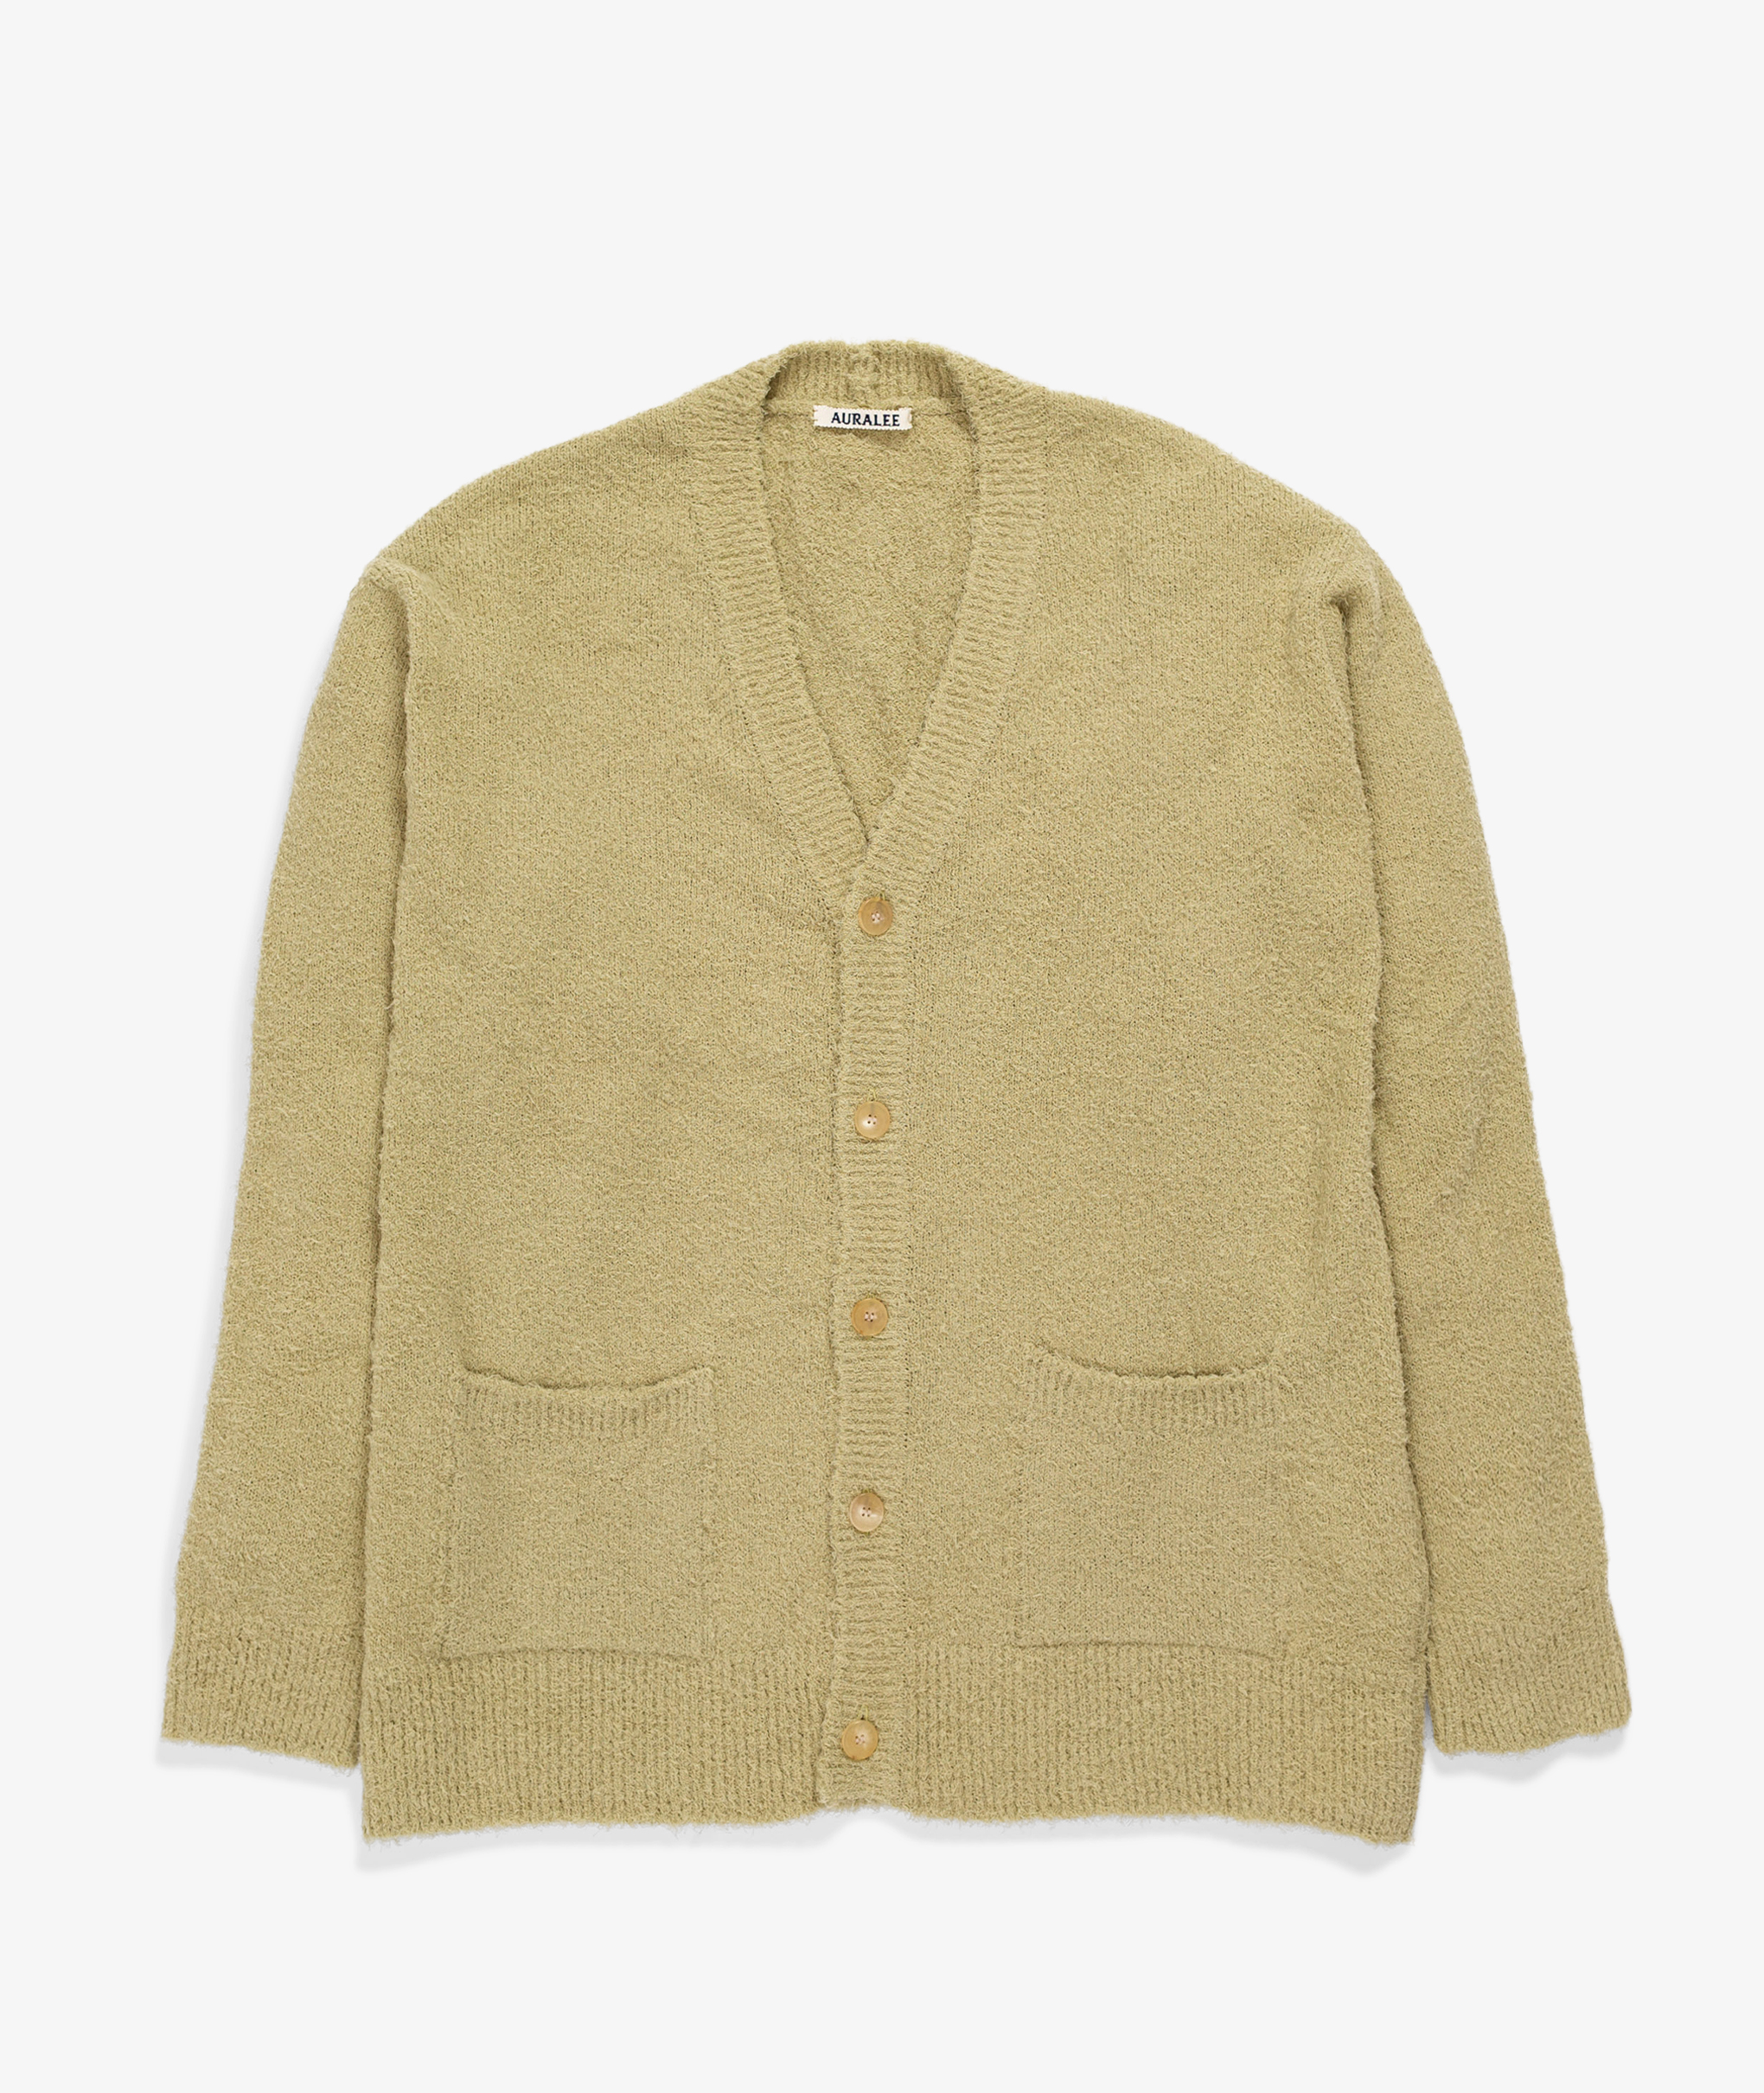 Norse Store | Shipping Worldwide - Auralee Shaggy Knit Cardigan